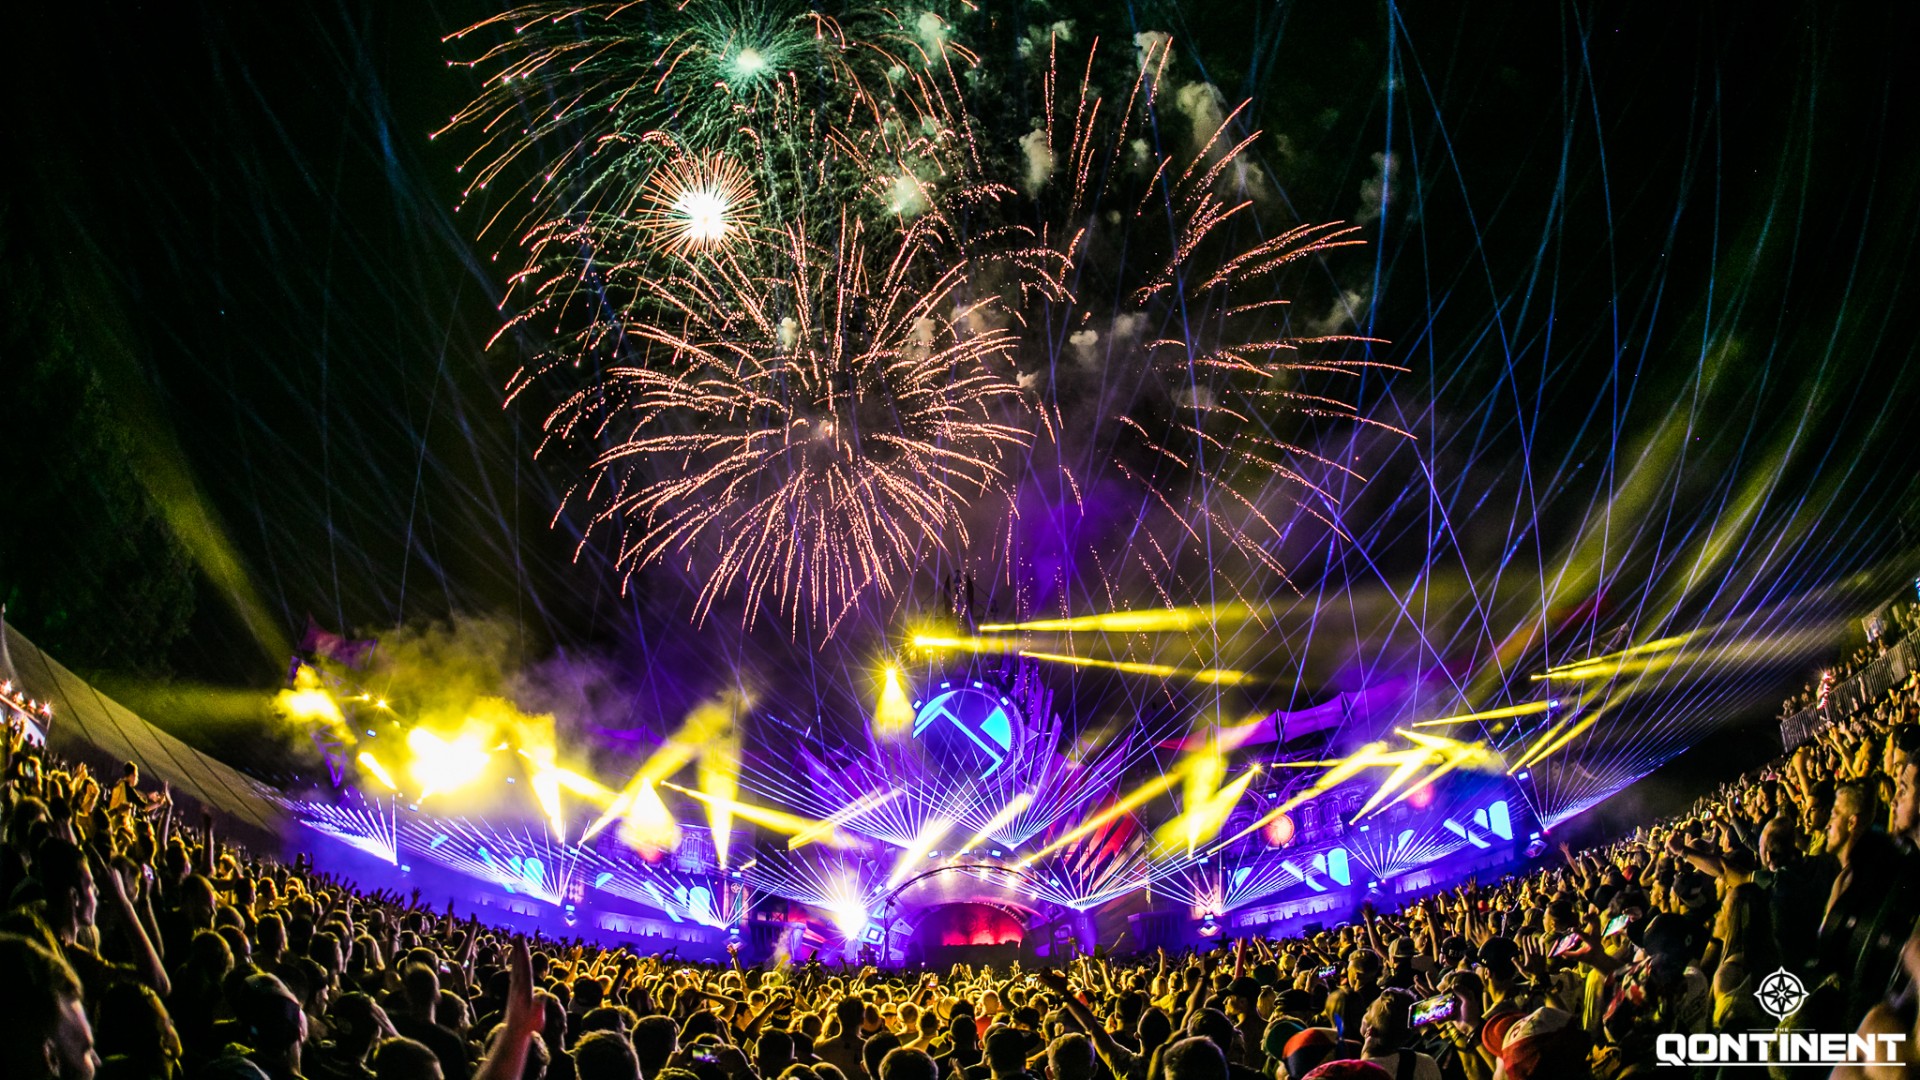 The Qontinent Festivals Stages Colorful Fireworks Lights Crowds Photography 1920x1080